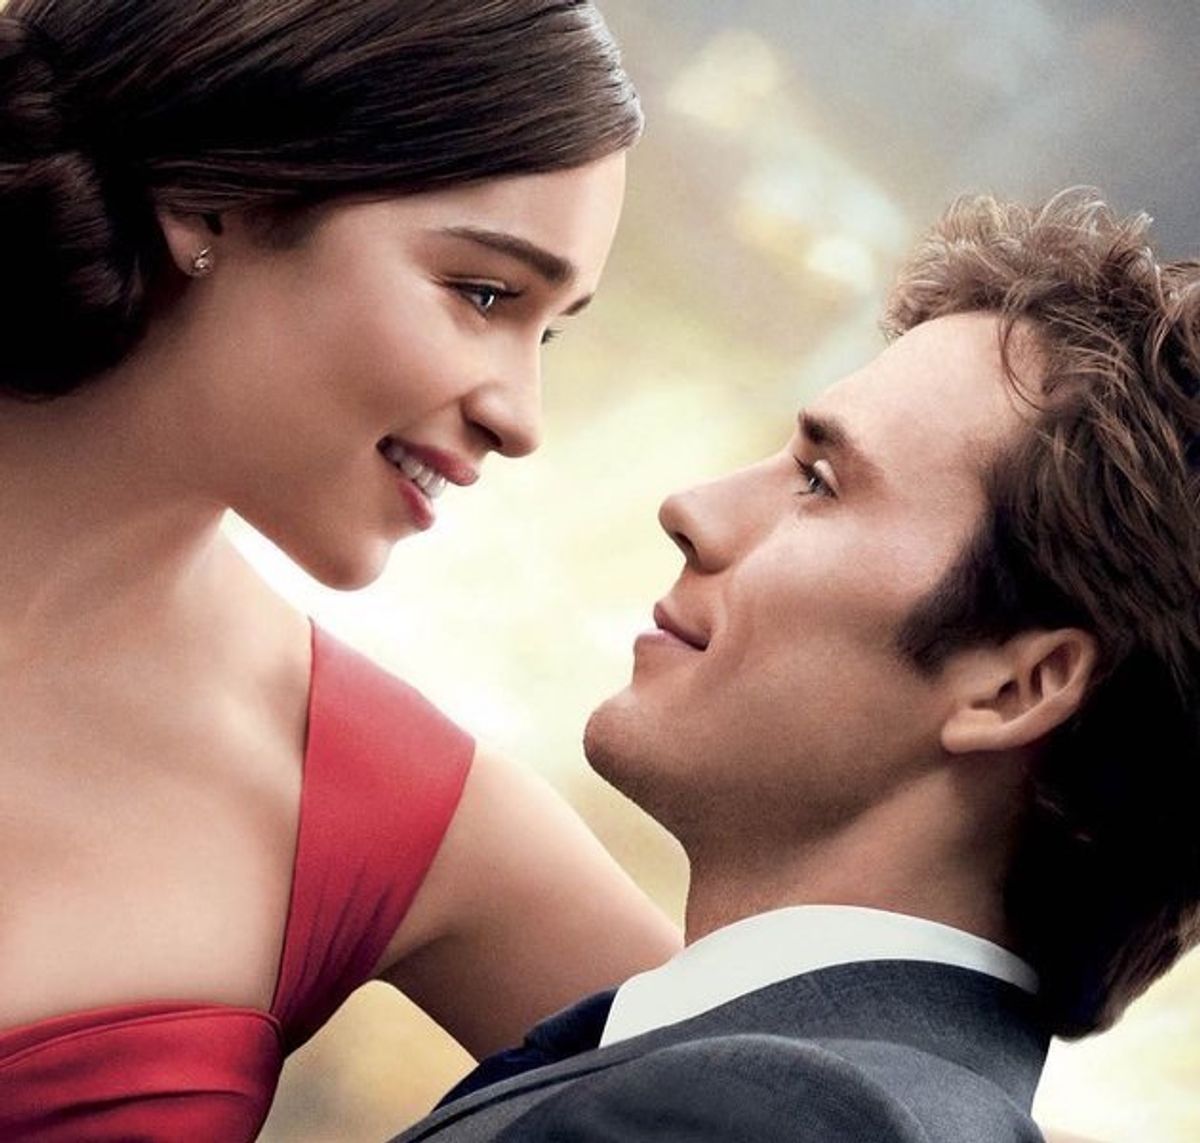 "Me Before You" Is Not A Beautiful Love Story